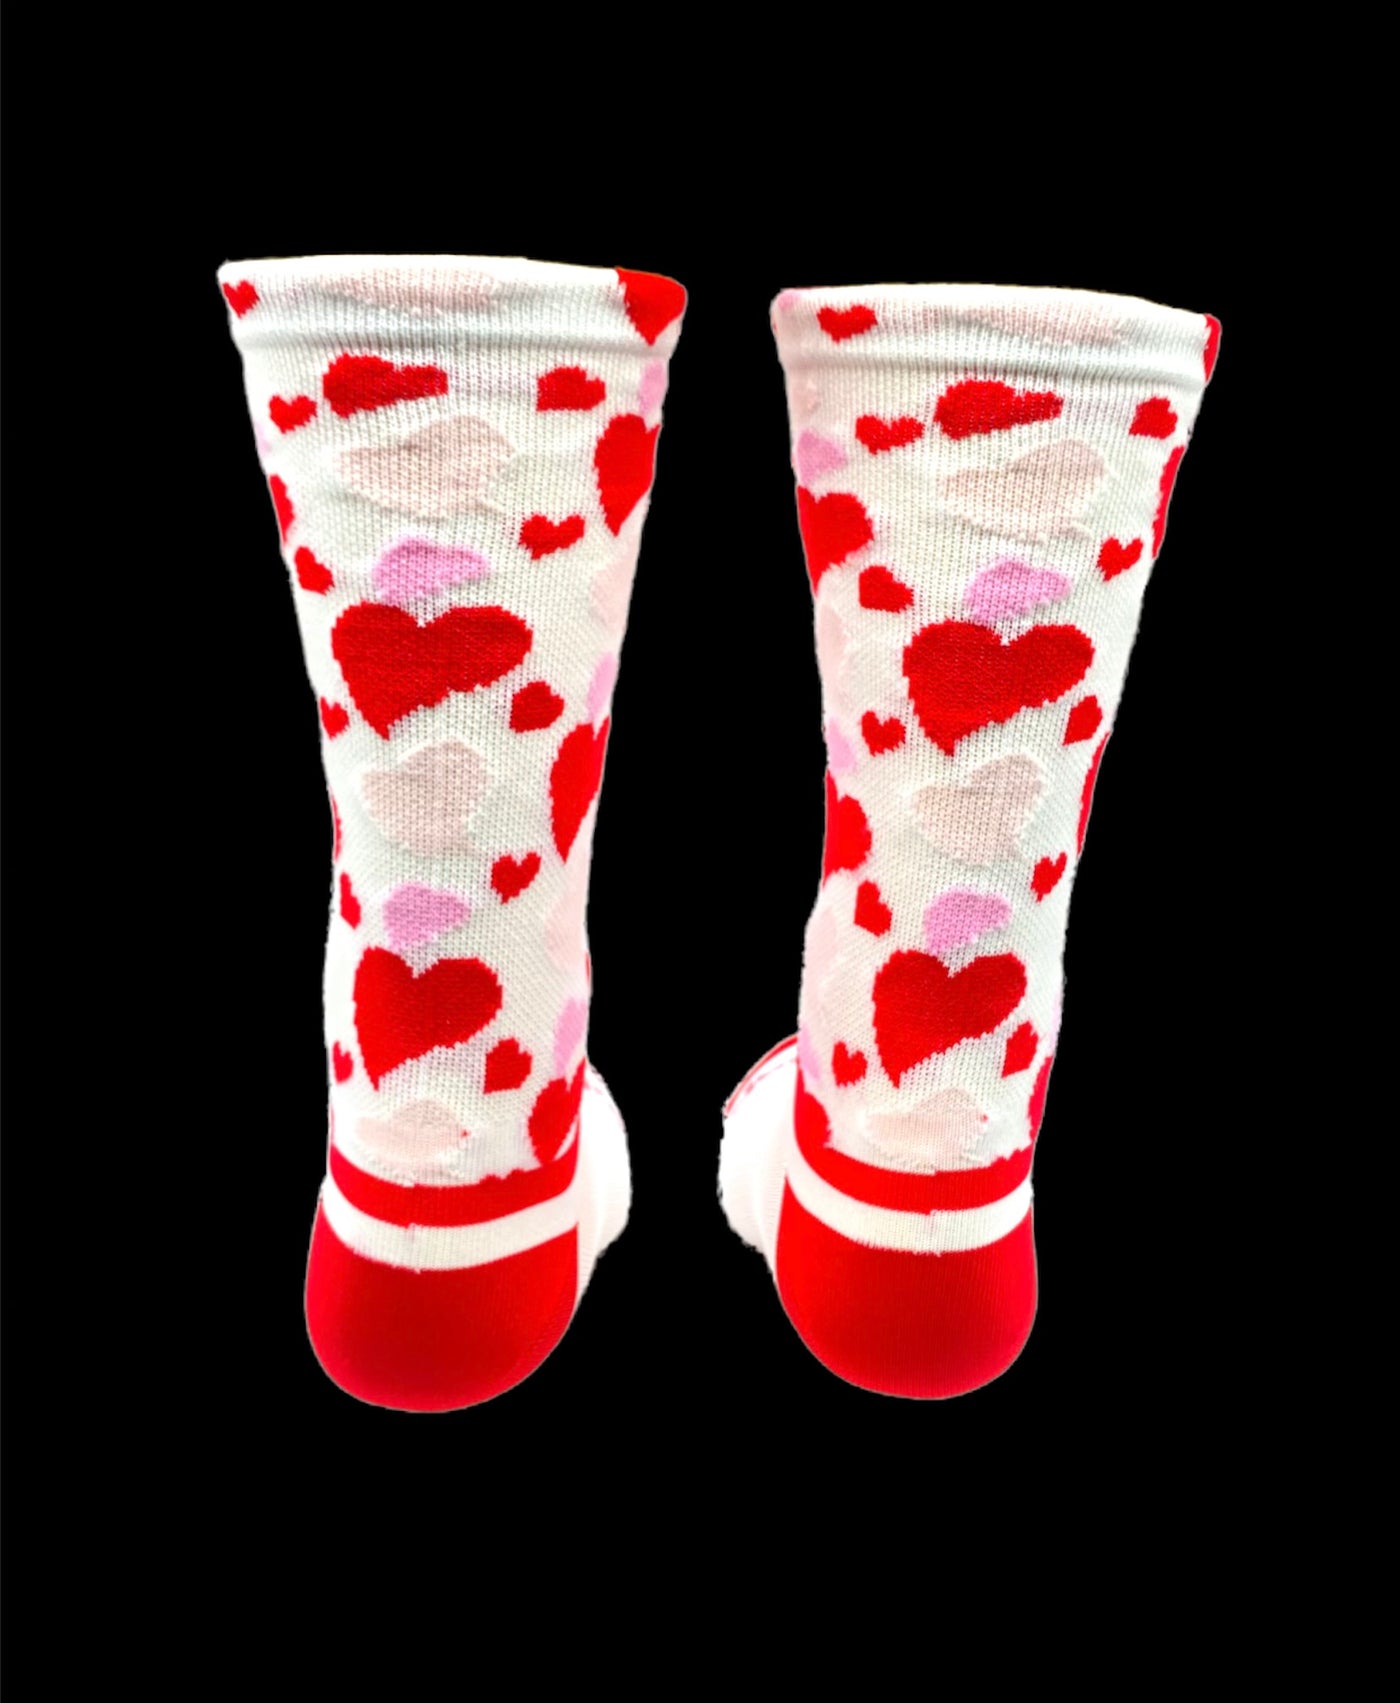 The Hearts”  is The  Men's and Women’s 6” Cycling Compression Socks that expresses love to your passion. (Pink, red, and white )